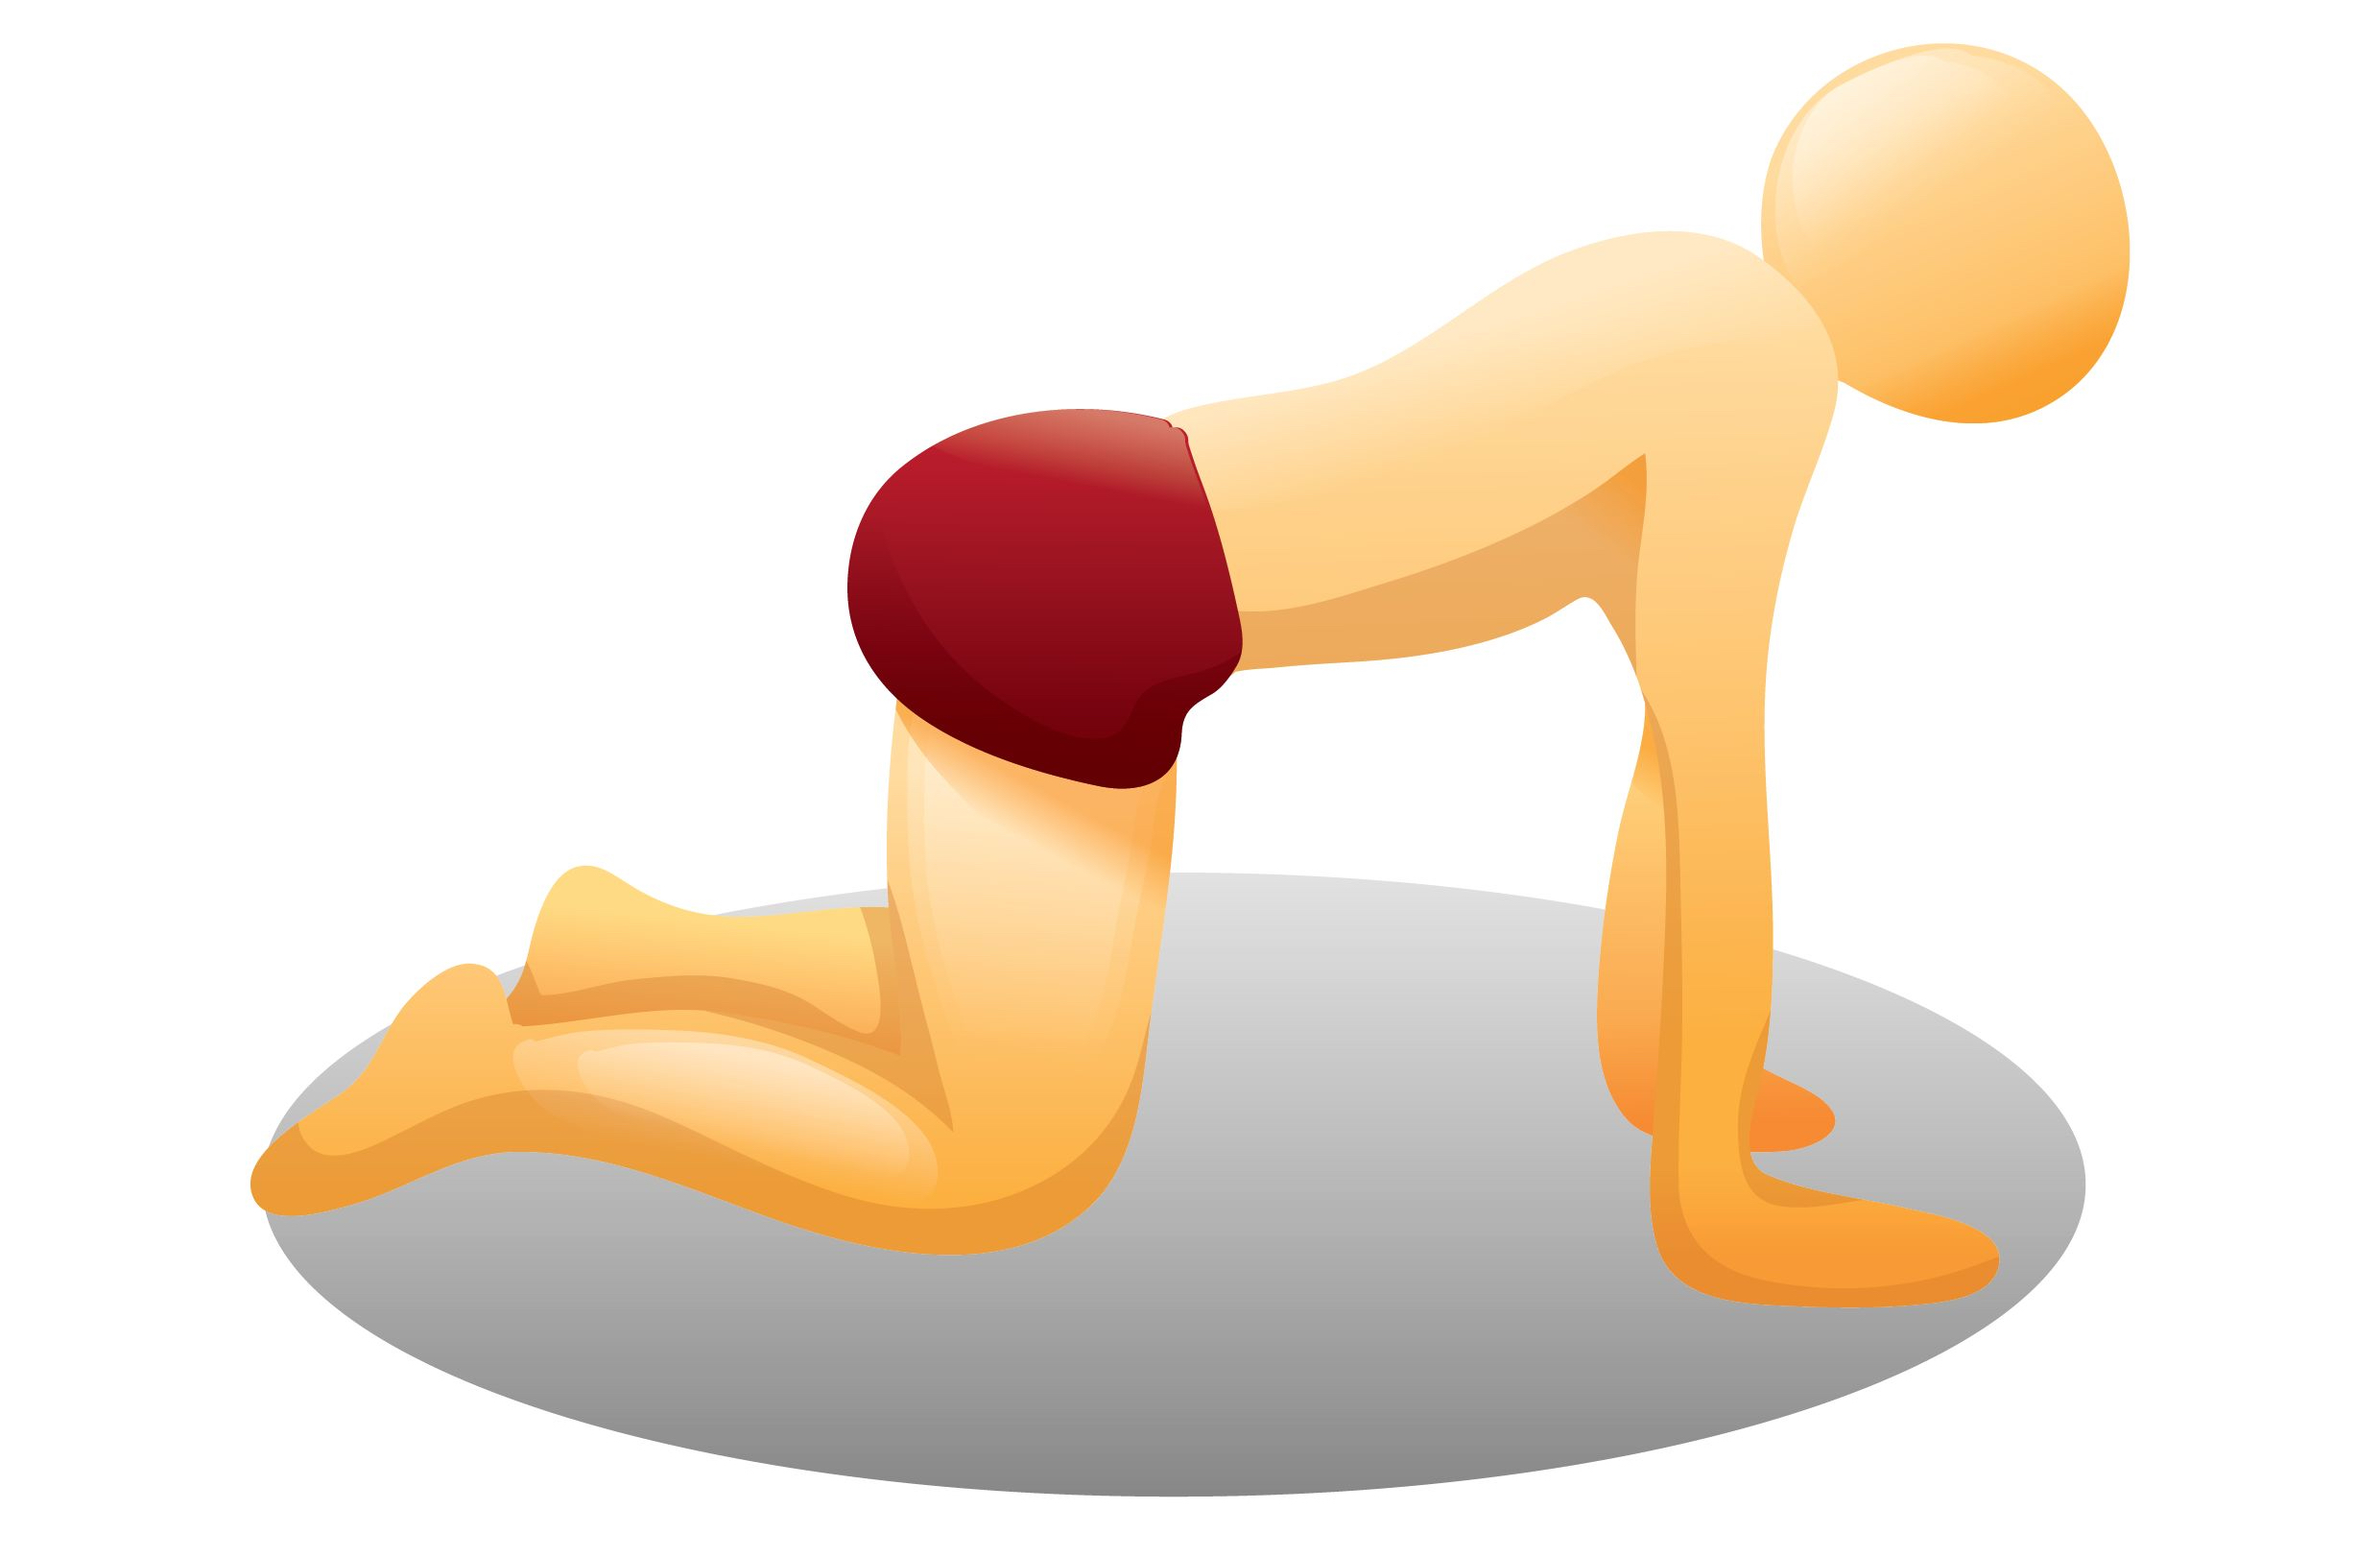 Play positions hands knees. Knee clipart hand on